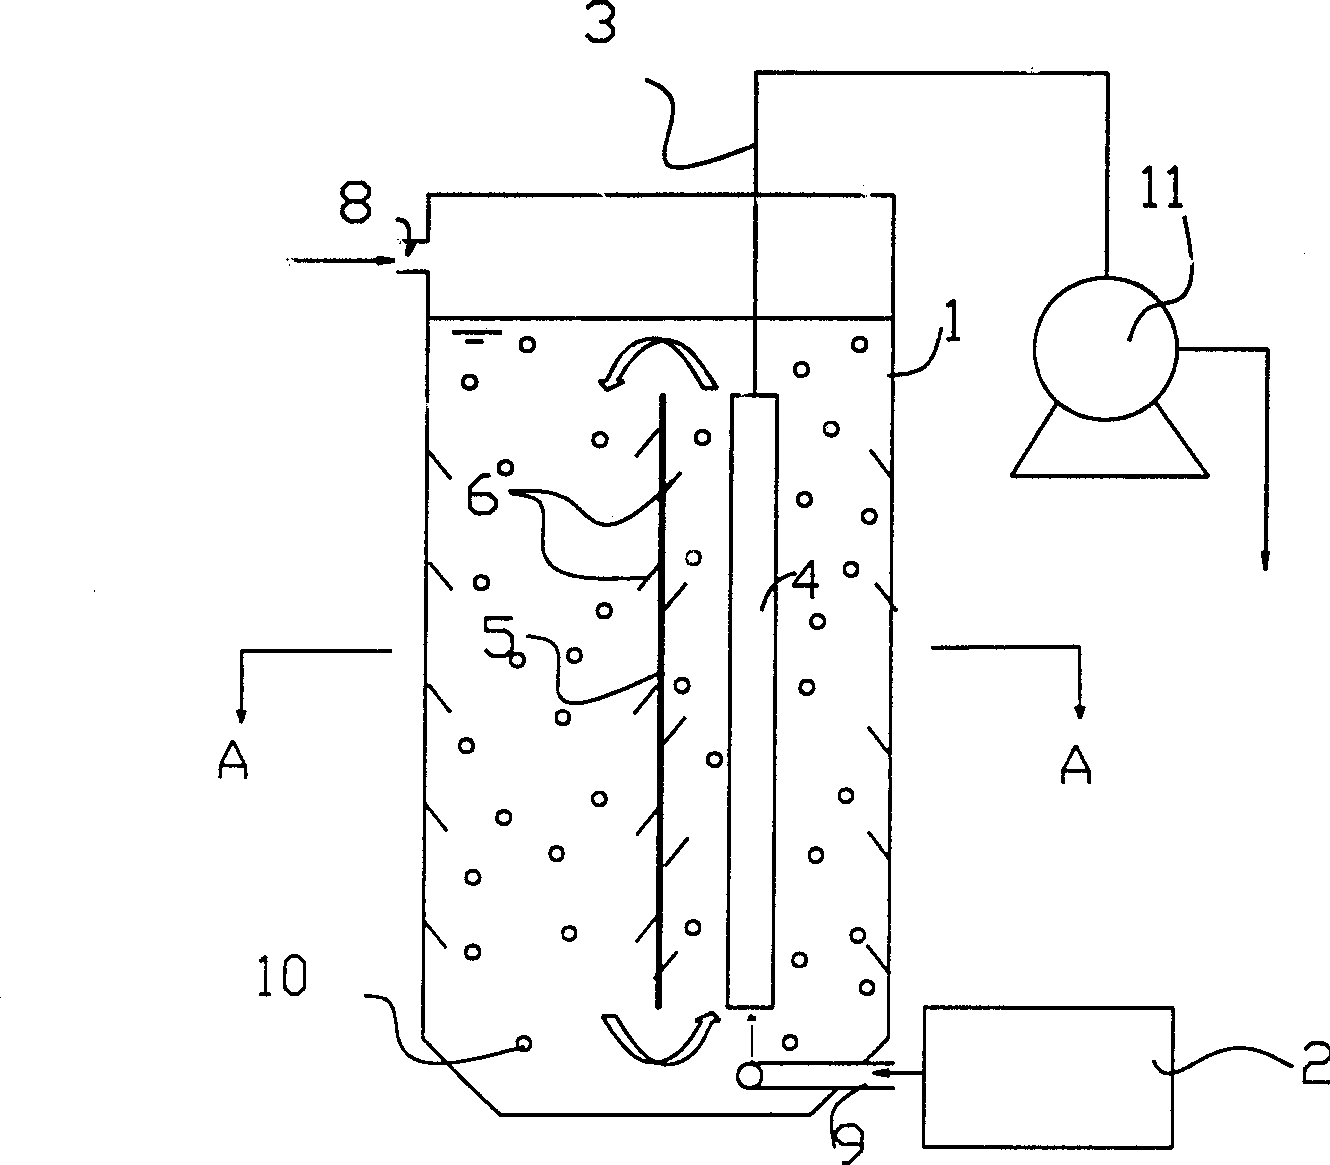 Stuffing-throwing fluidized bed membrane bioreactor and water treating method